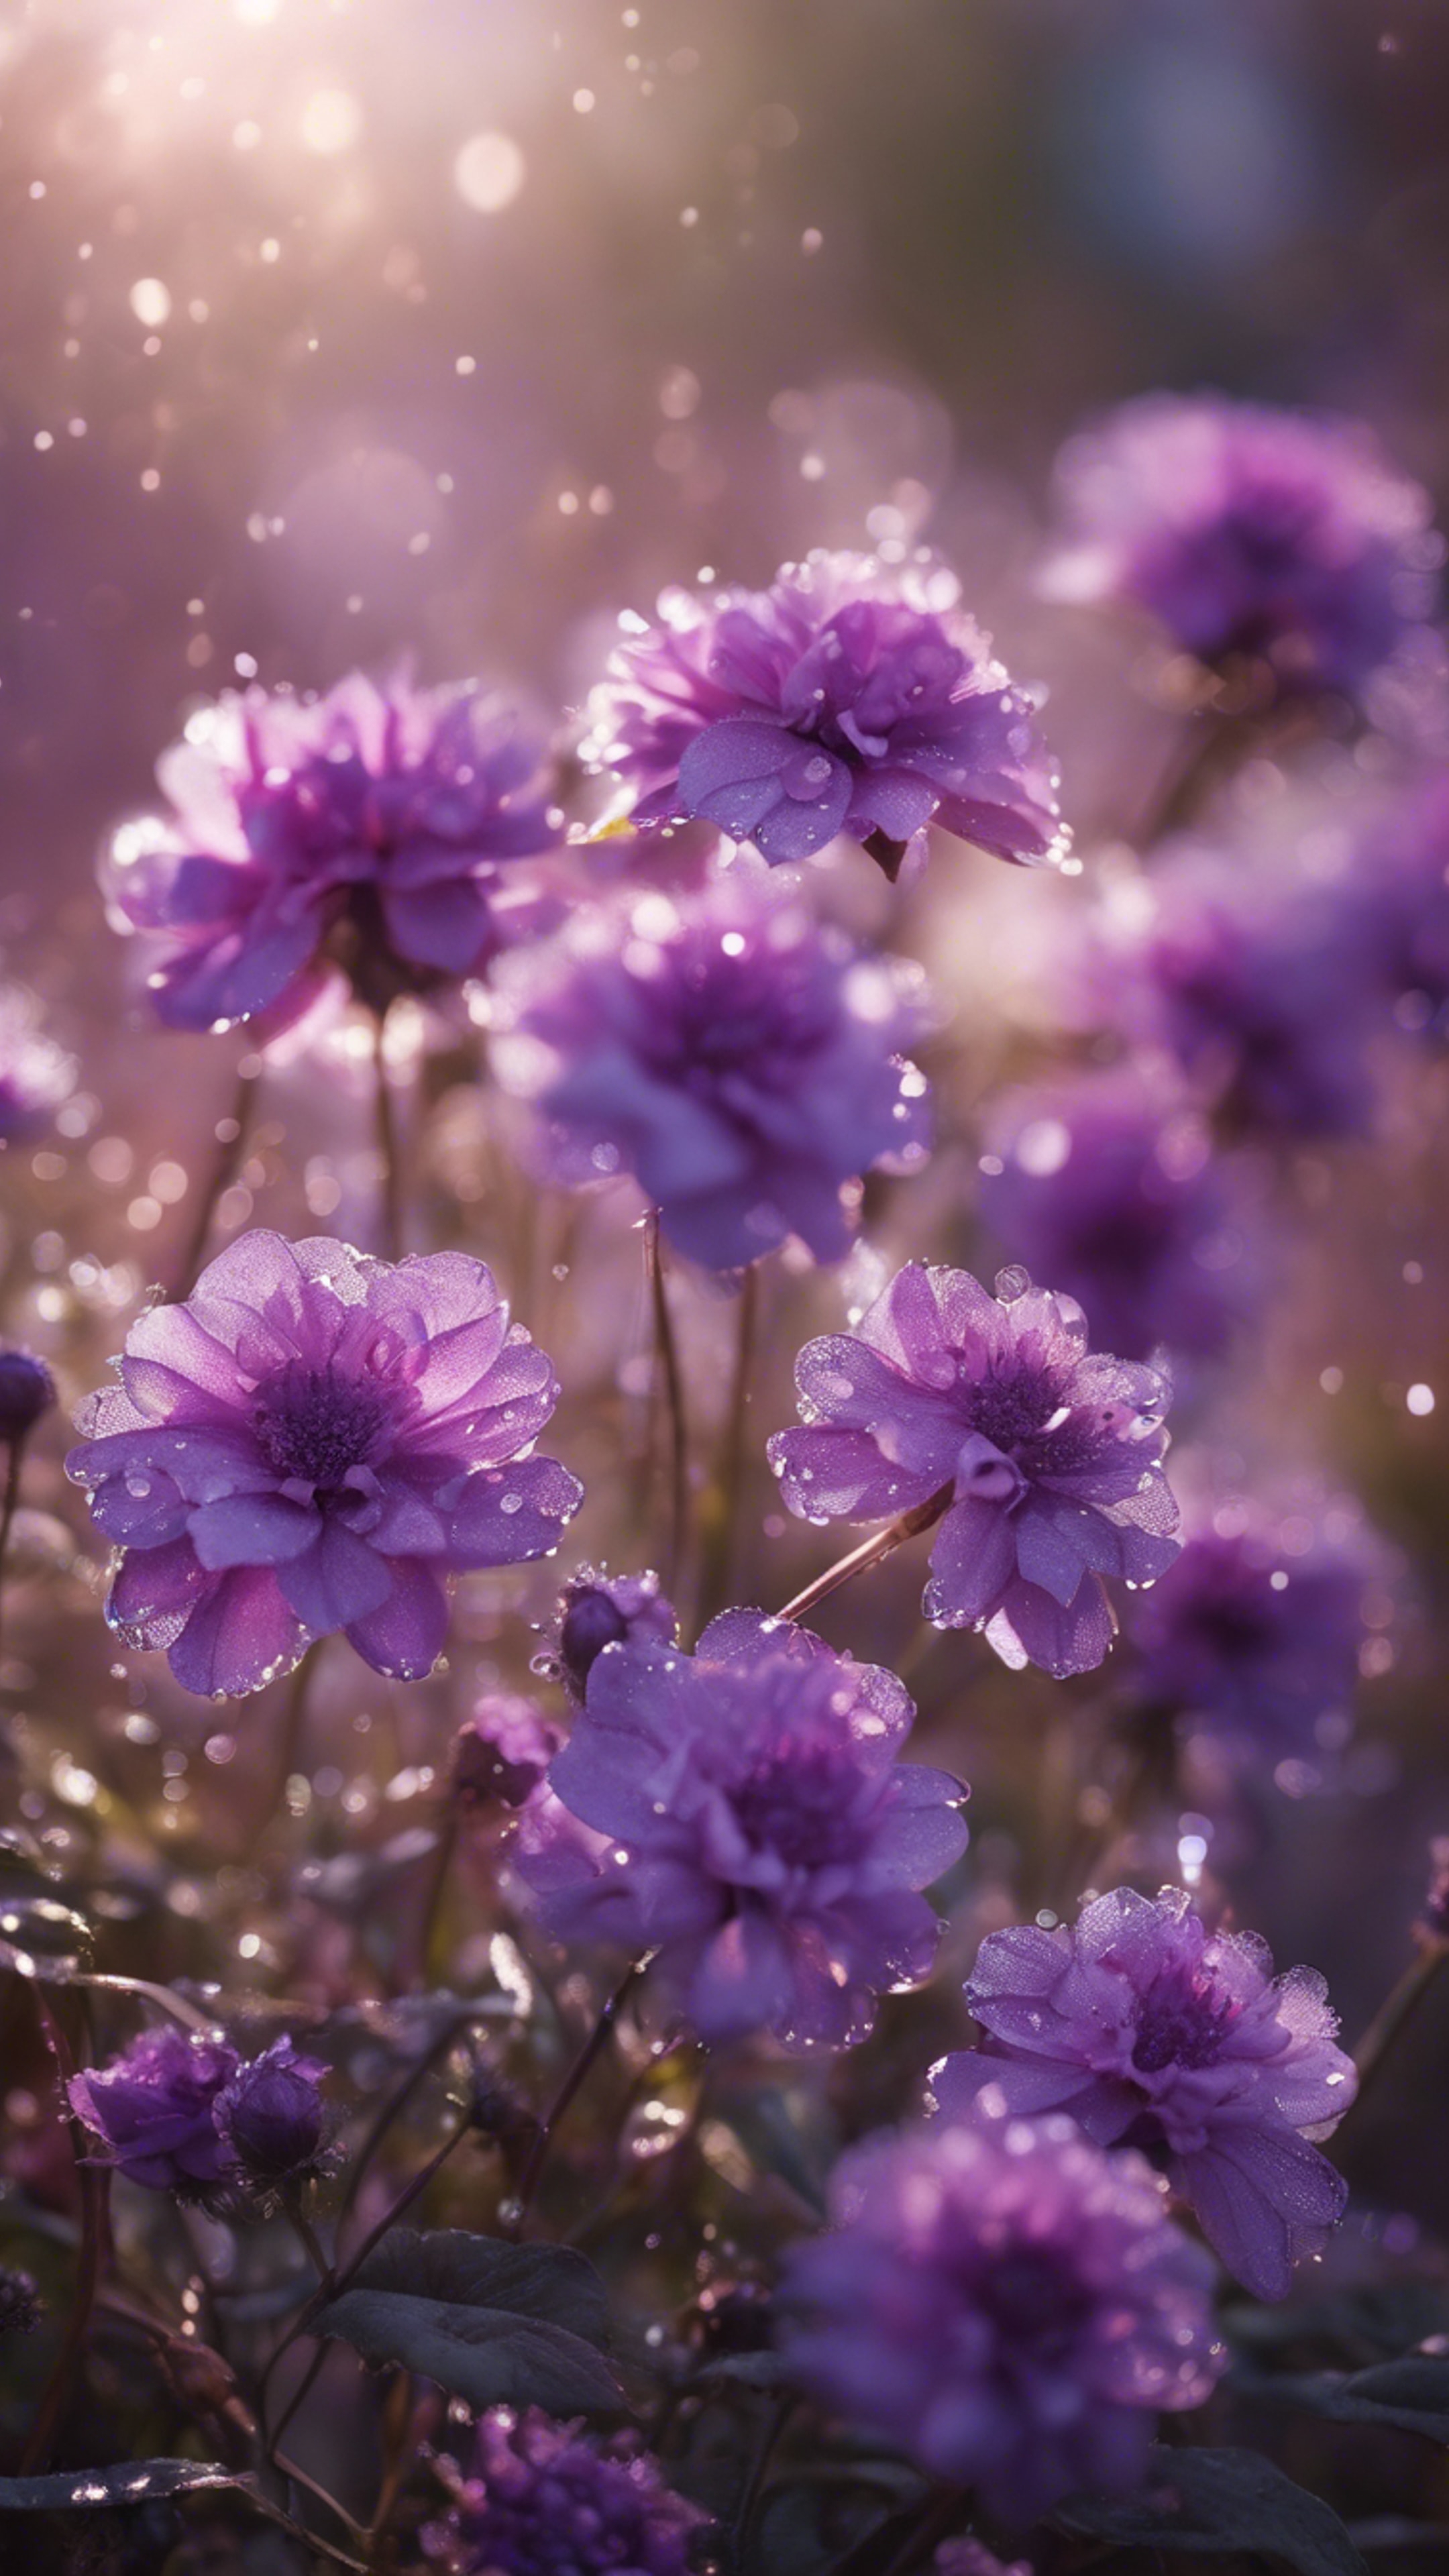 An impressive collage of purple flowers in full bloom, highlighted by sparkling morning dew. Papel de parede[23d1df20d4e341739cf3]